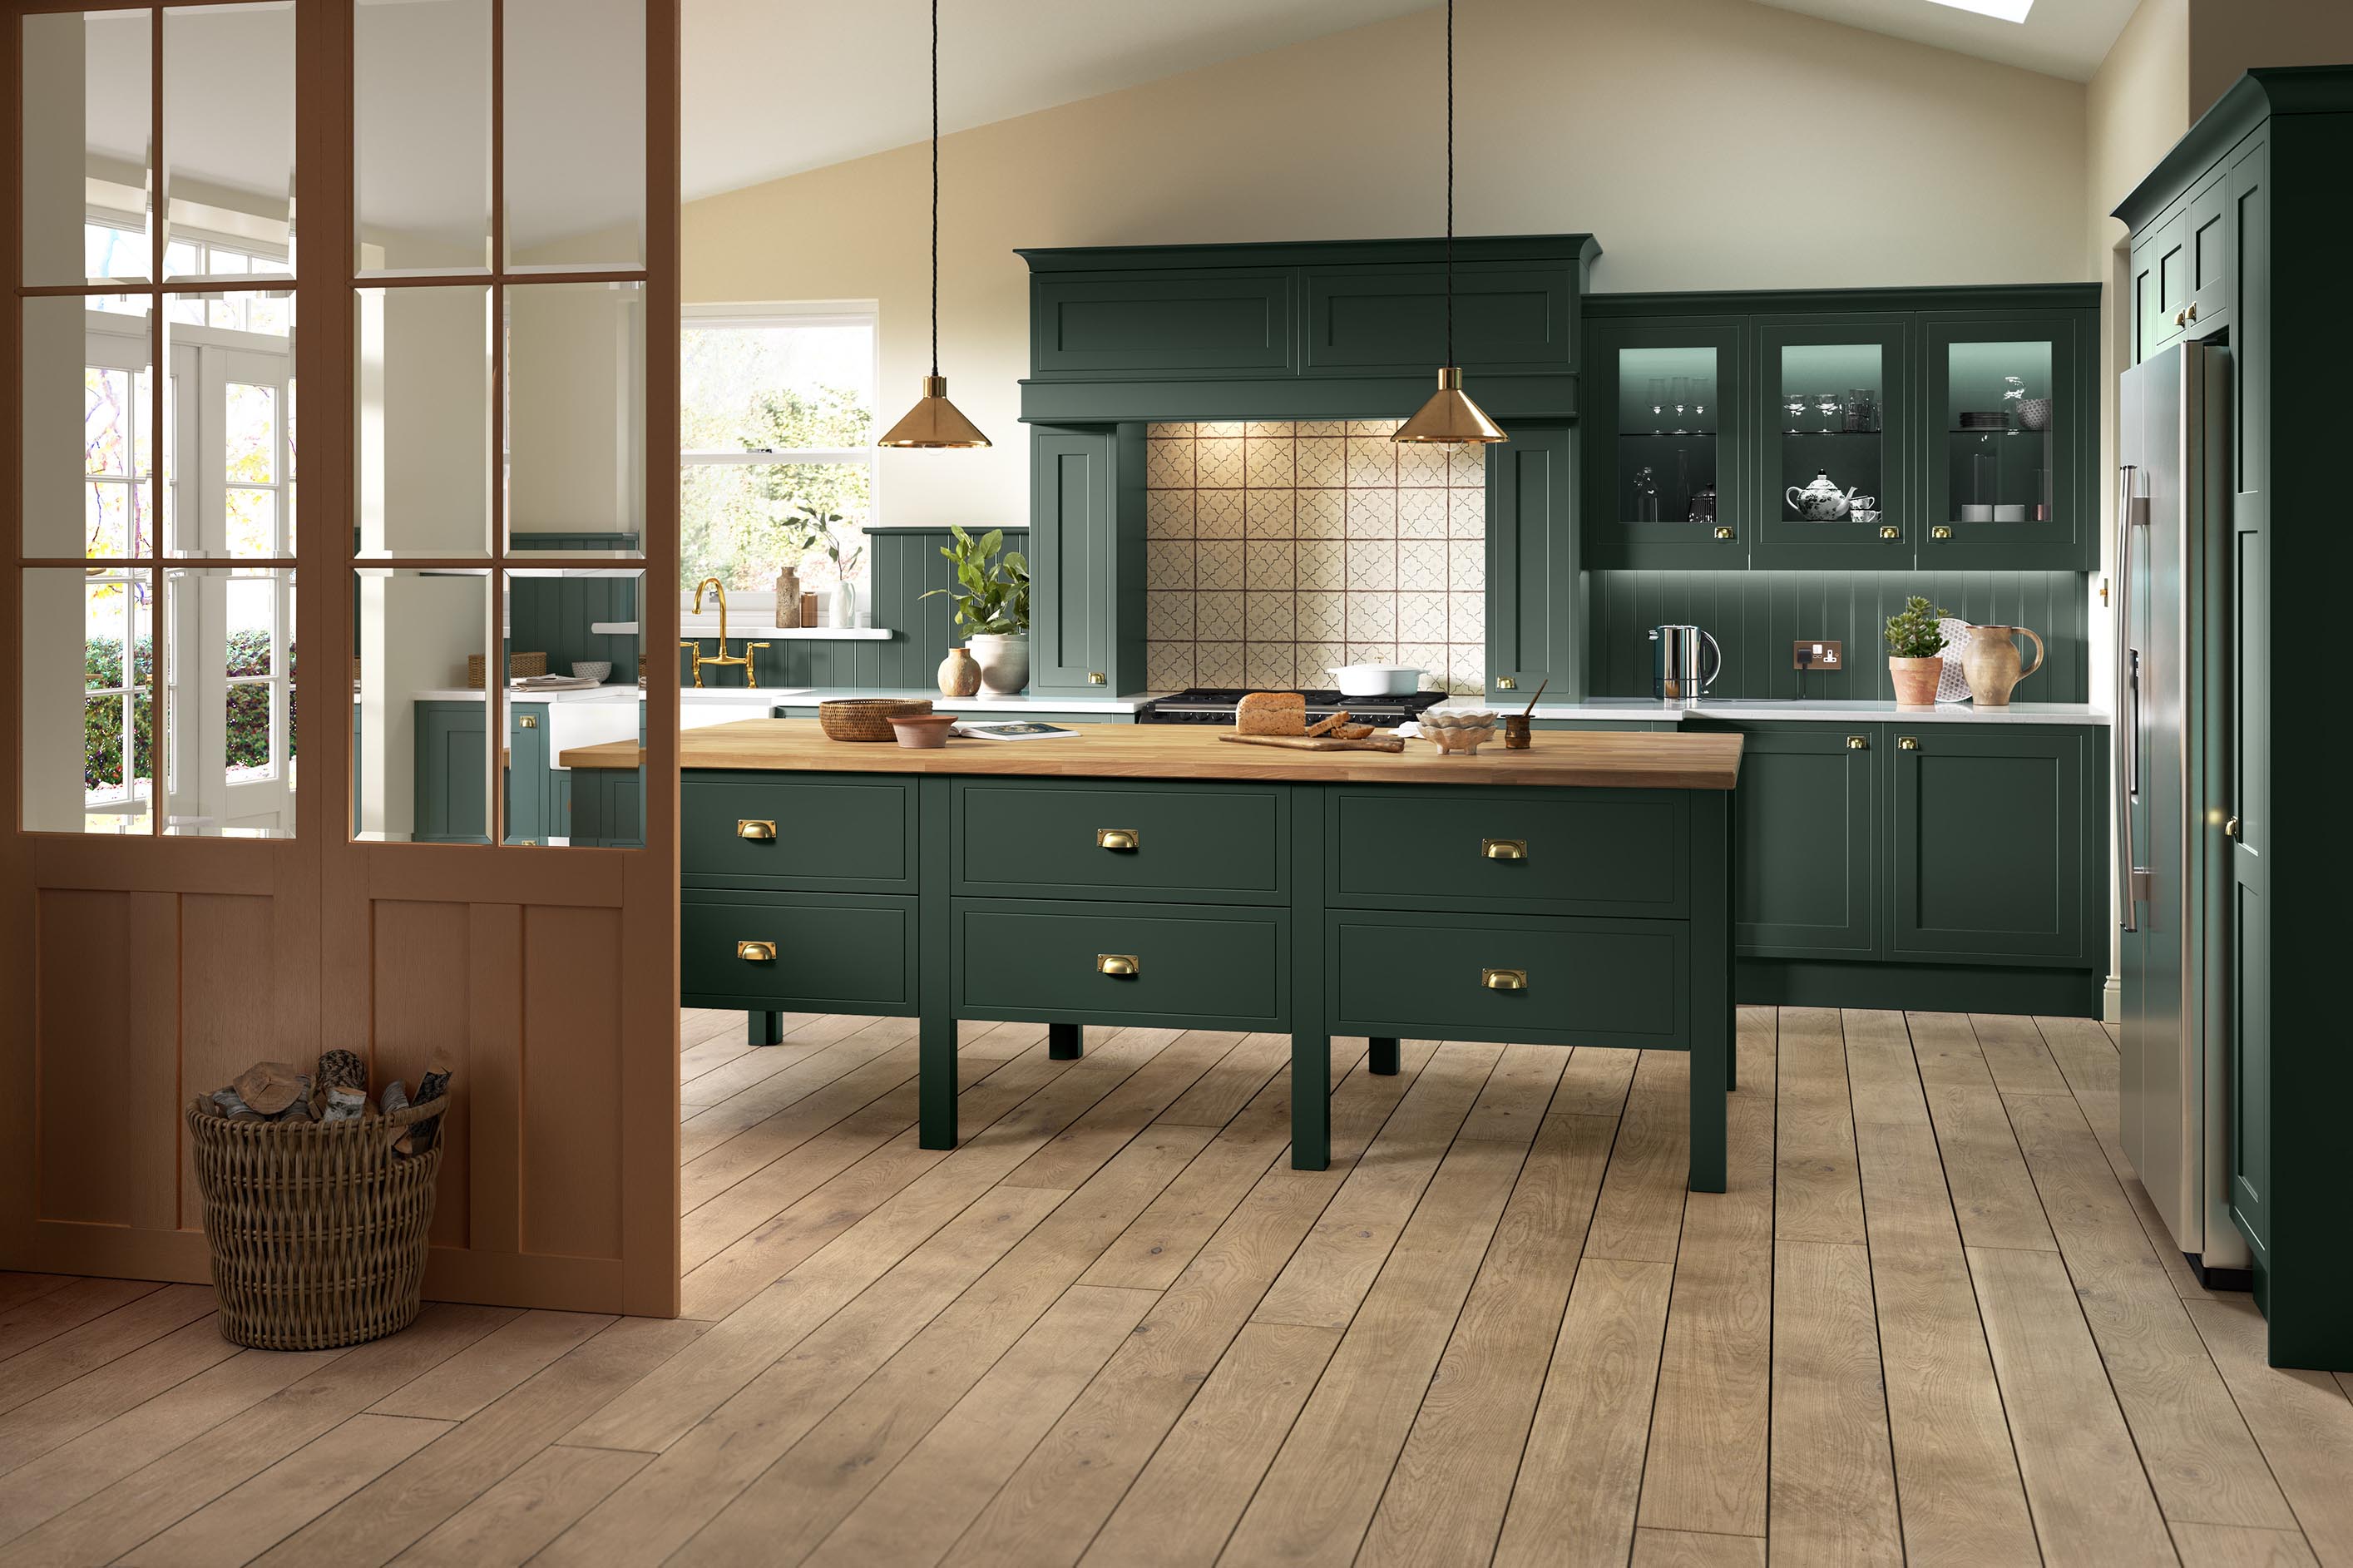 Mock In-Frame Shaker-Style Kitchen Painted Heritage Green featuring large freestanding island unit, pendant lighting, ada cooker, belfast sink, American fridge freezer and adjoining utility room